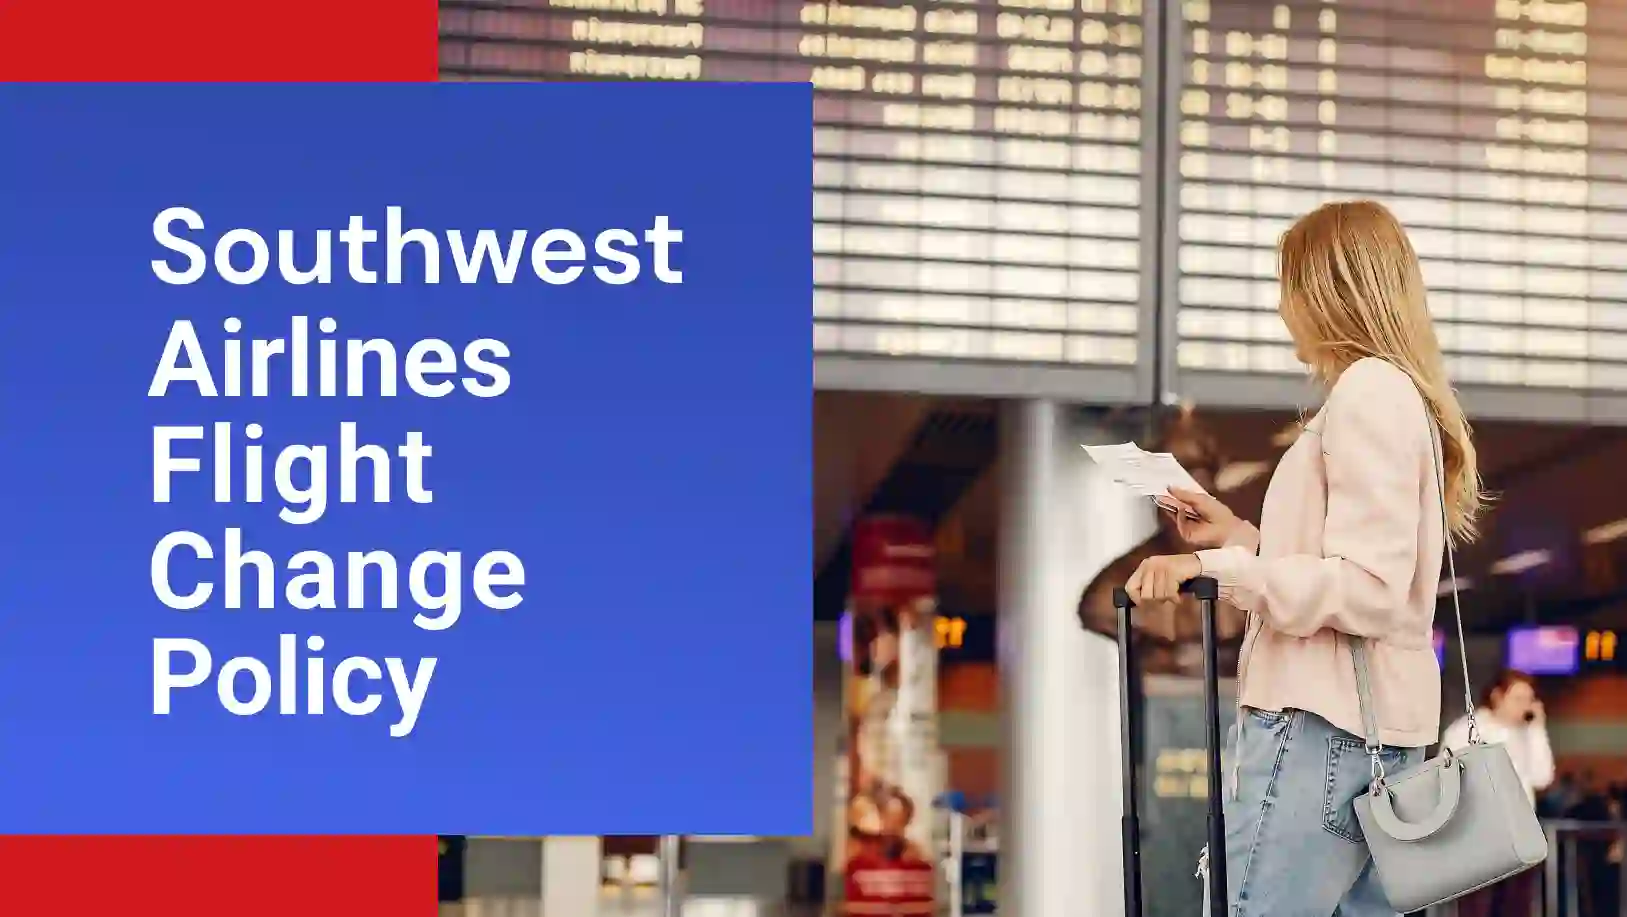 Southwest Airlines Flight Change Policy online